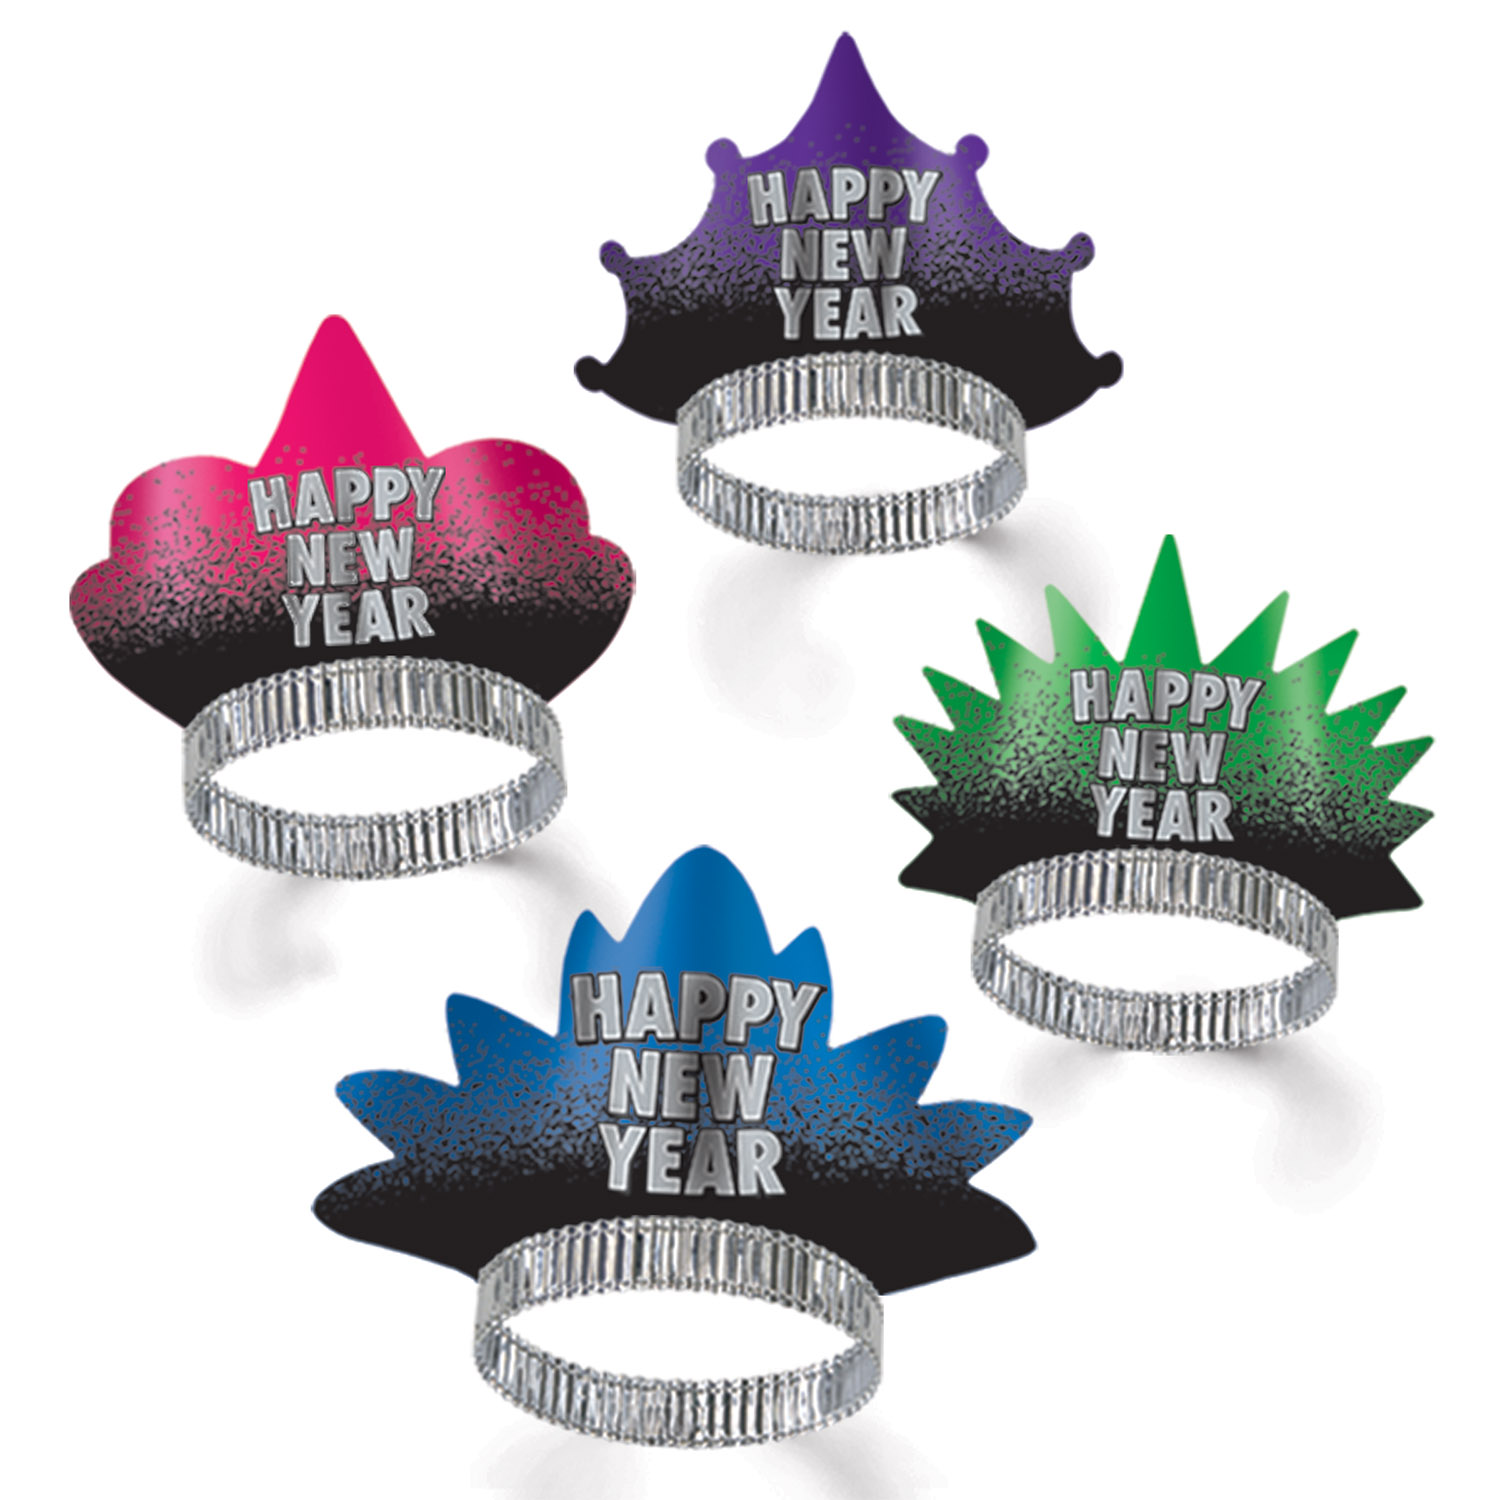 50 Pieces of New Year Resolution Tiaras